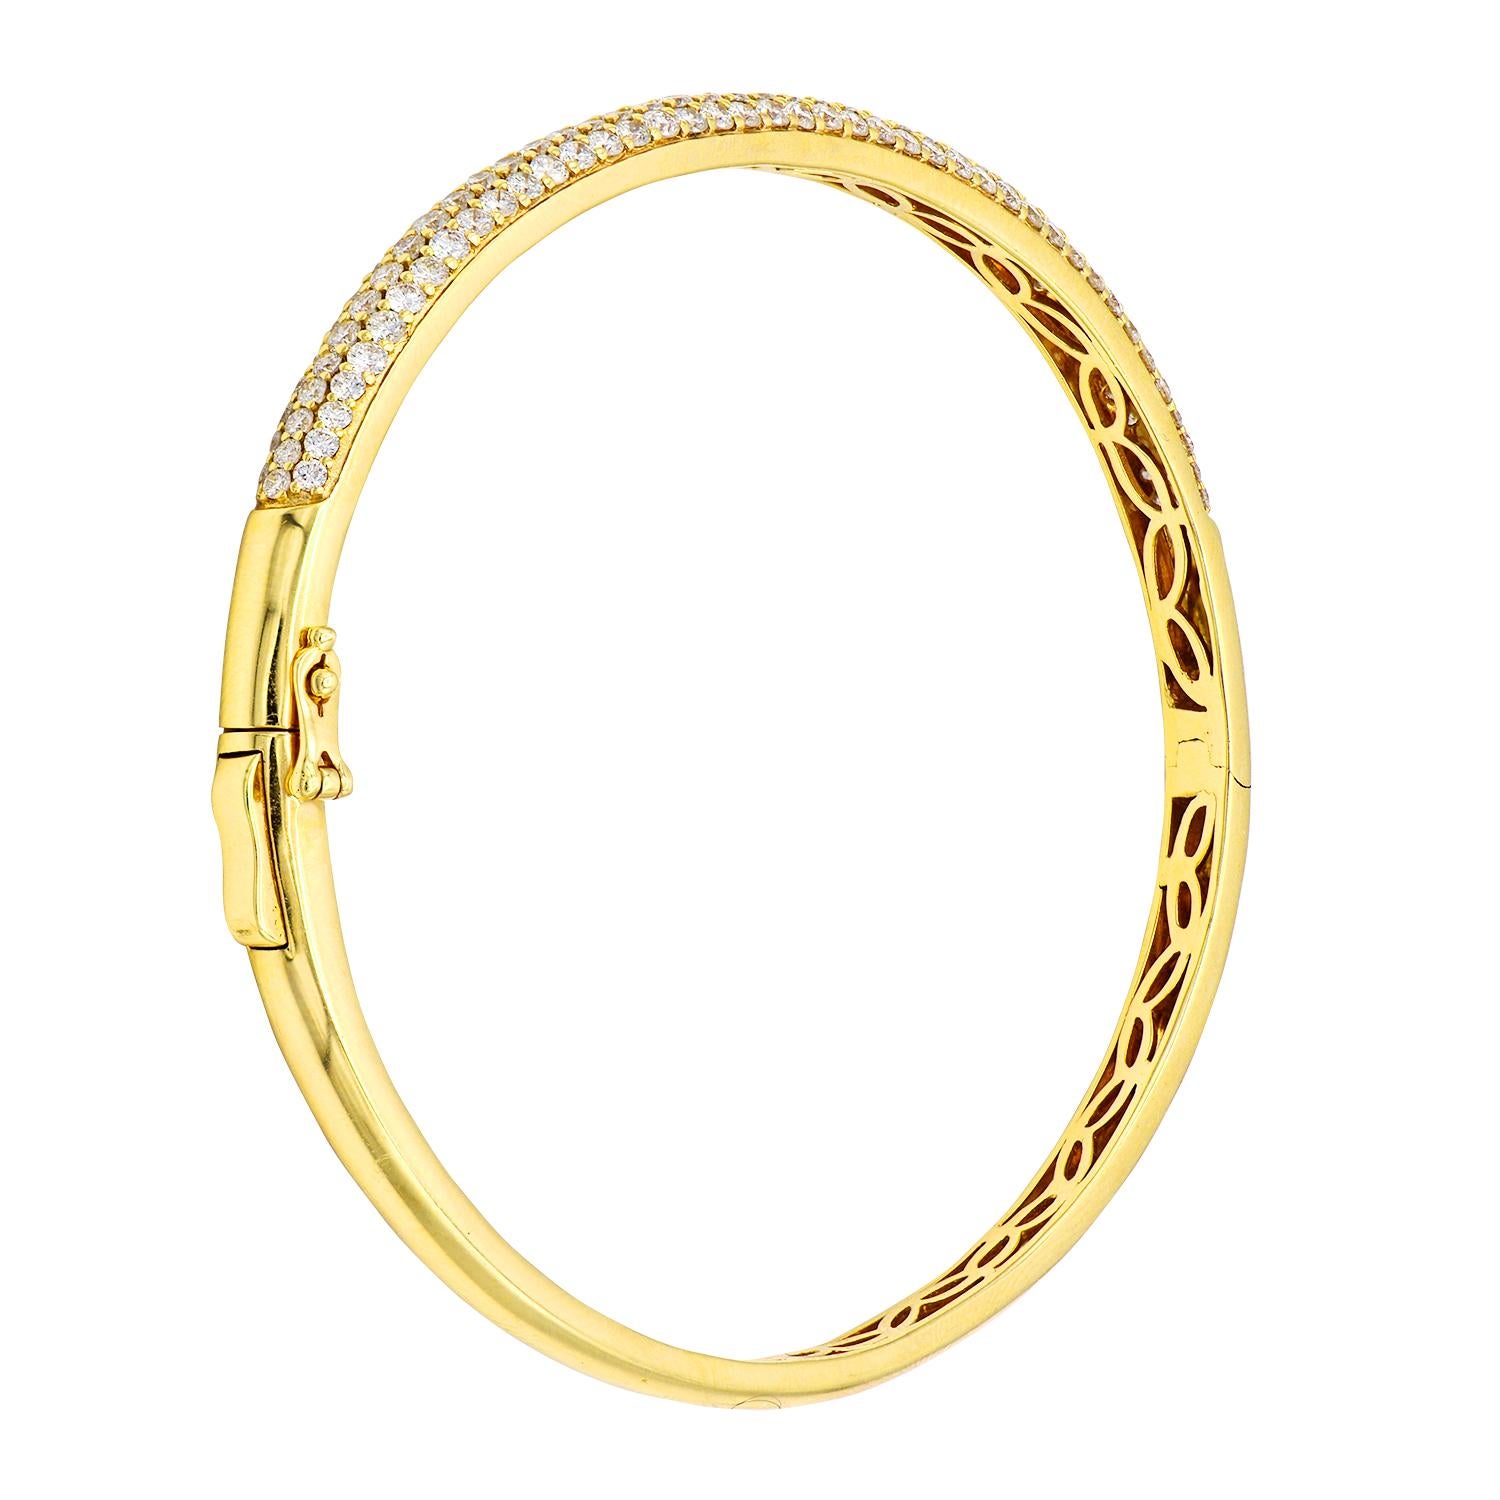 Fashion and glam are at the forefront with this exquisite diamond bangle. This 14-karat yellow gold bracelet is made from 10.5 grams of gold. The top is adorned with three rows of SI1-0SI2, GH color diamonds made out of 127 diamonds totaling 2.08